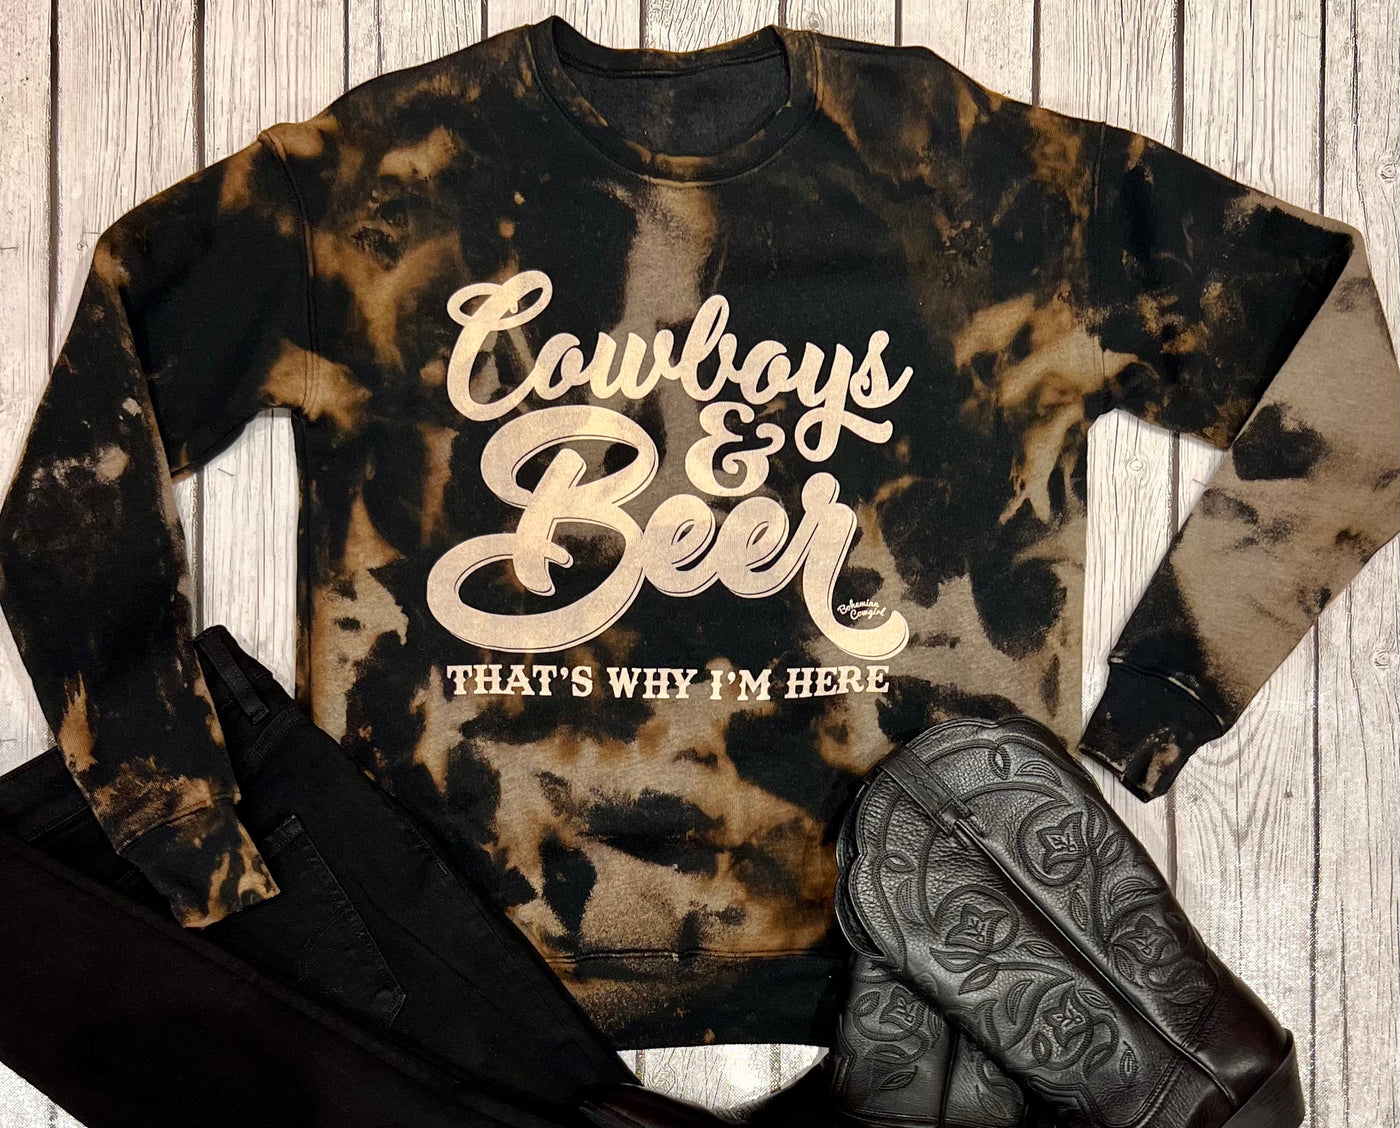 Cowboys and Beer